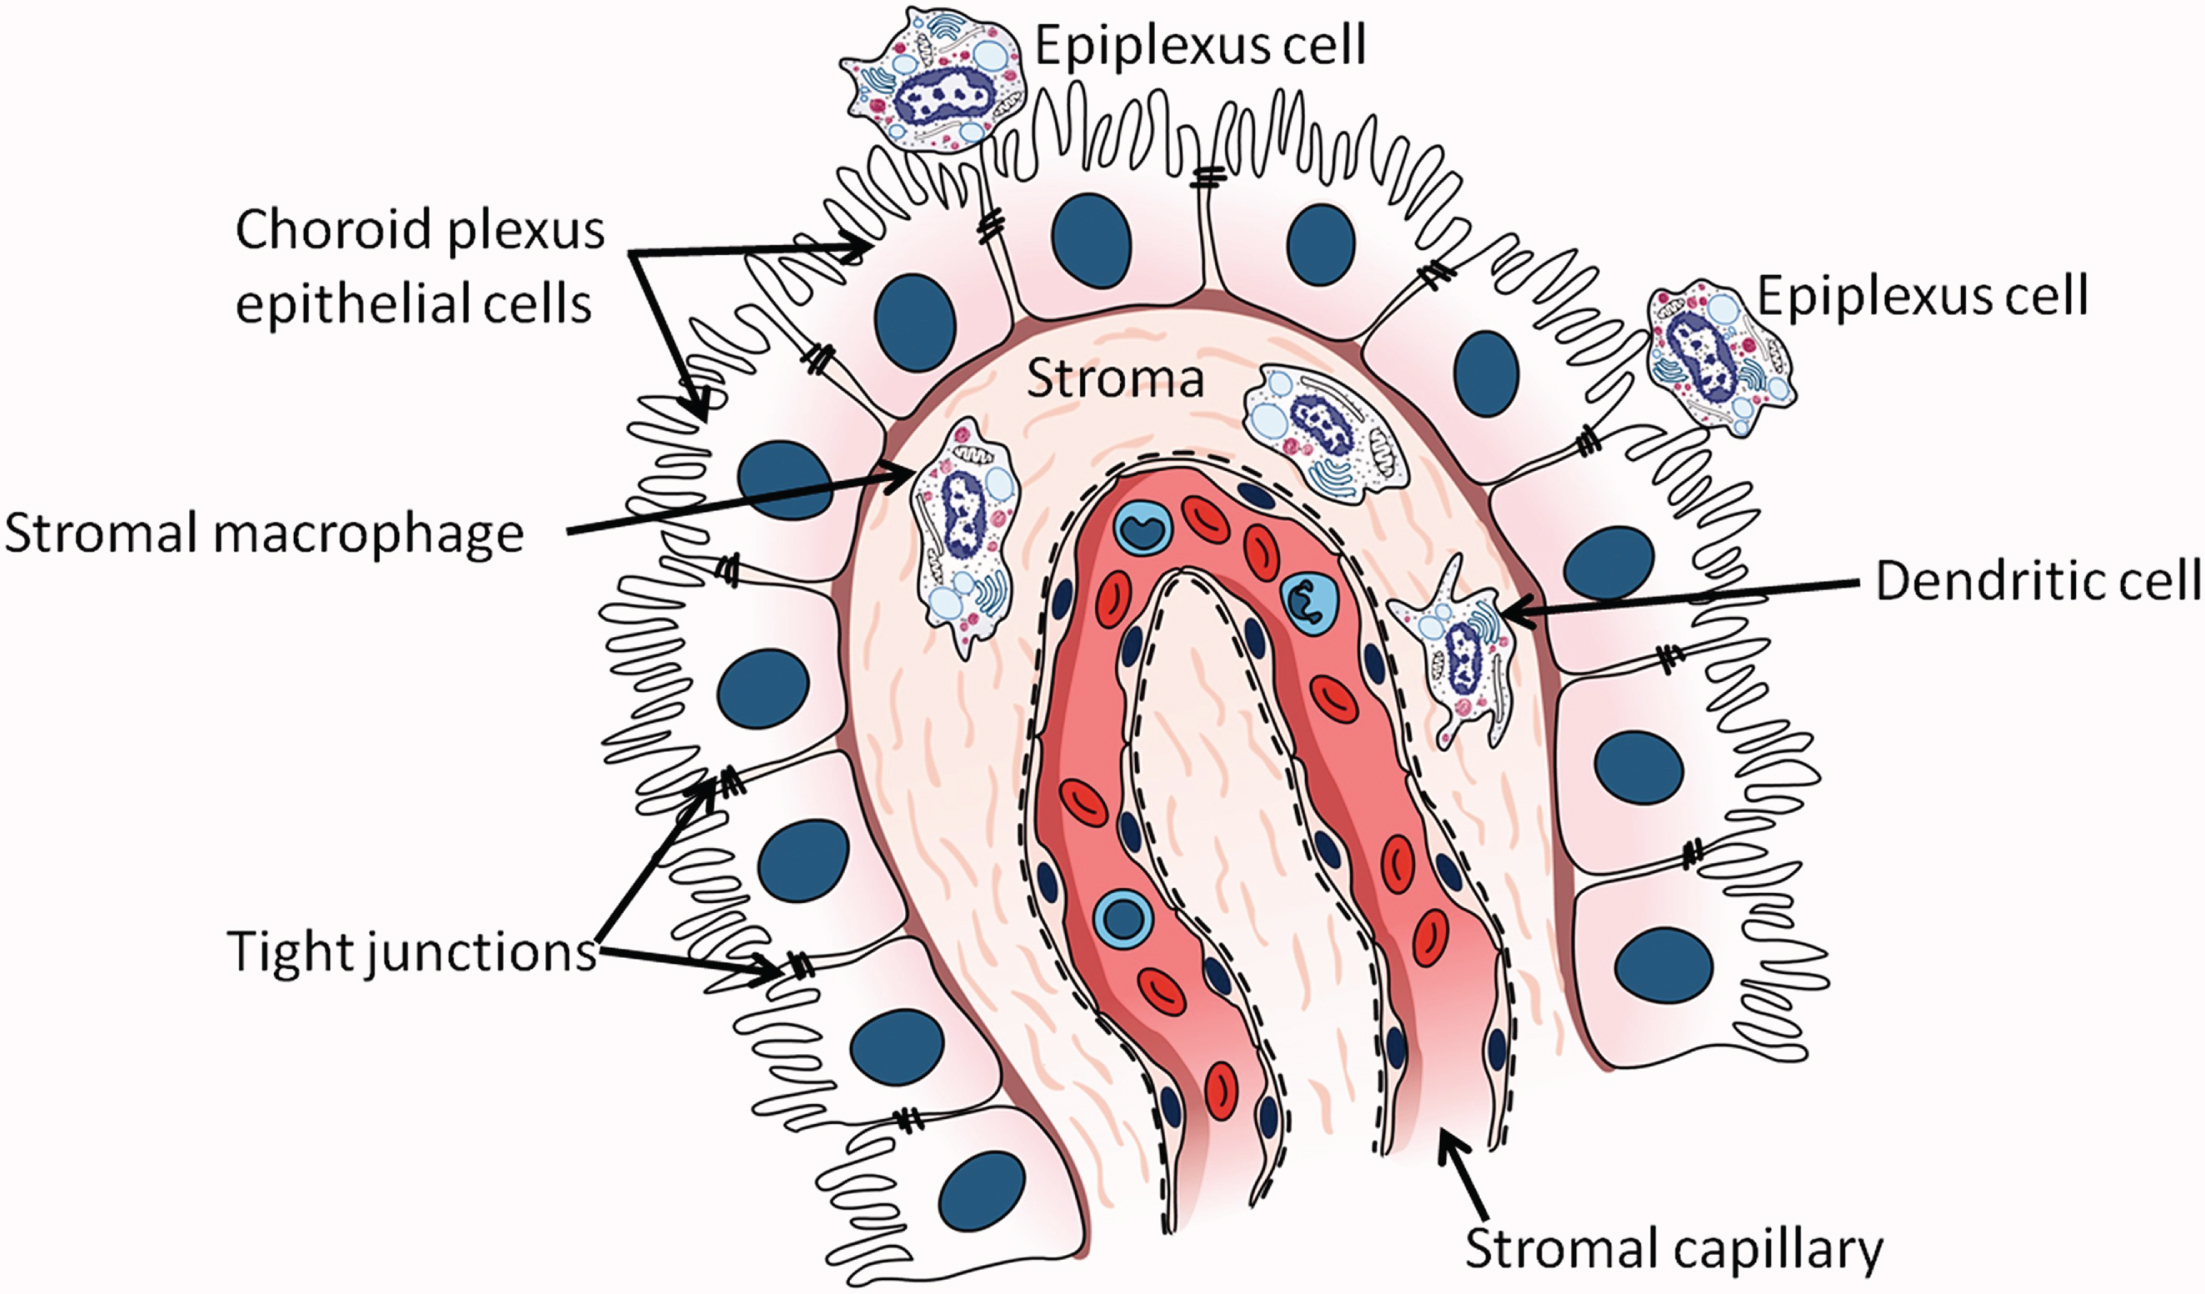 The choroid plexus in the lateral ventricle. Epithelial cells of the choroid plexus rest on a basement membrane and contain microvilli projecting into the lumen of the lateral ventricle. Tight junctions are present between cells near their apical surfaces. (From: Kaur C, Rathnasamy G, Ling EA. The Choroid Plexus in Healthy and Diseased Brain. J Neuropathol Exp Neurol 2016;75(3):198–213; copyright Oxford University Press. Reproduced with permission of Oxford University Press).